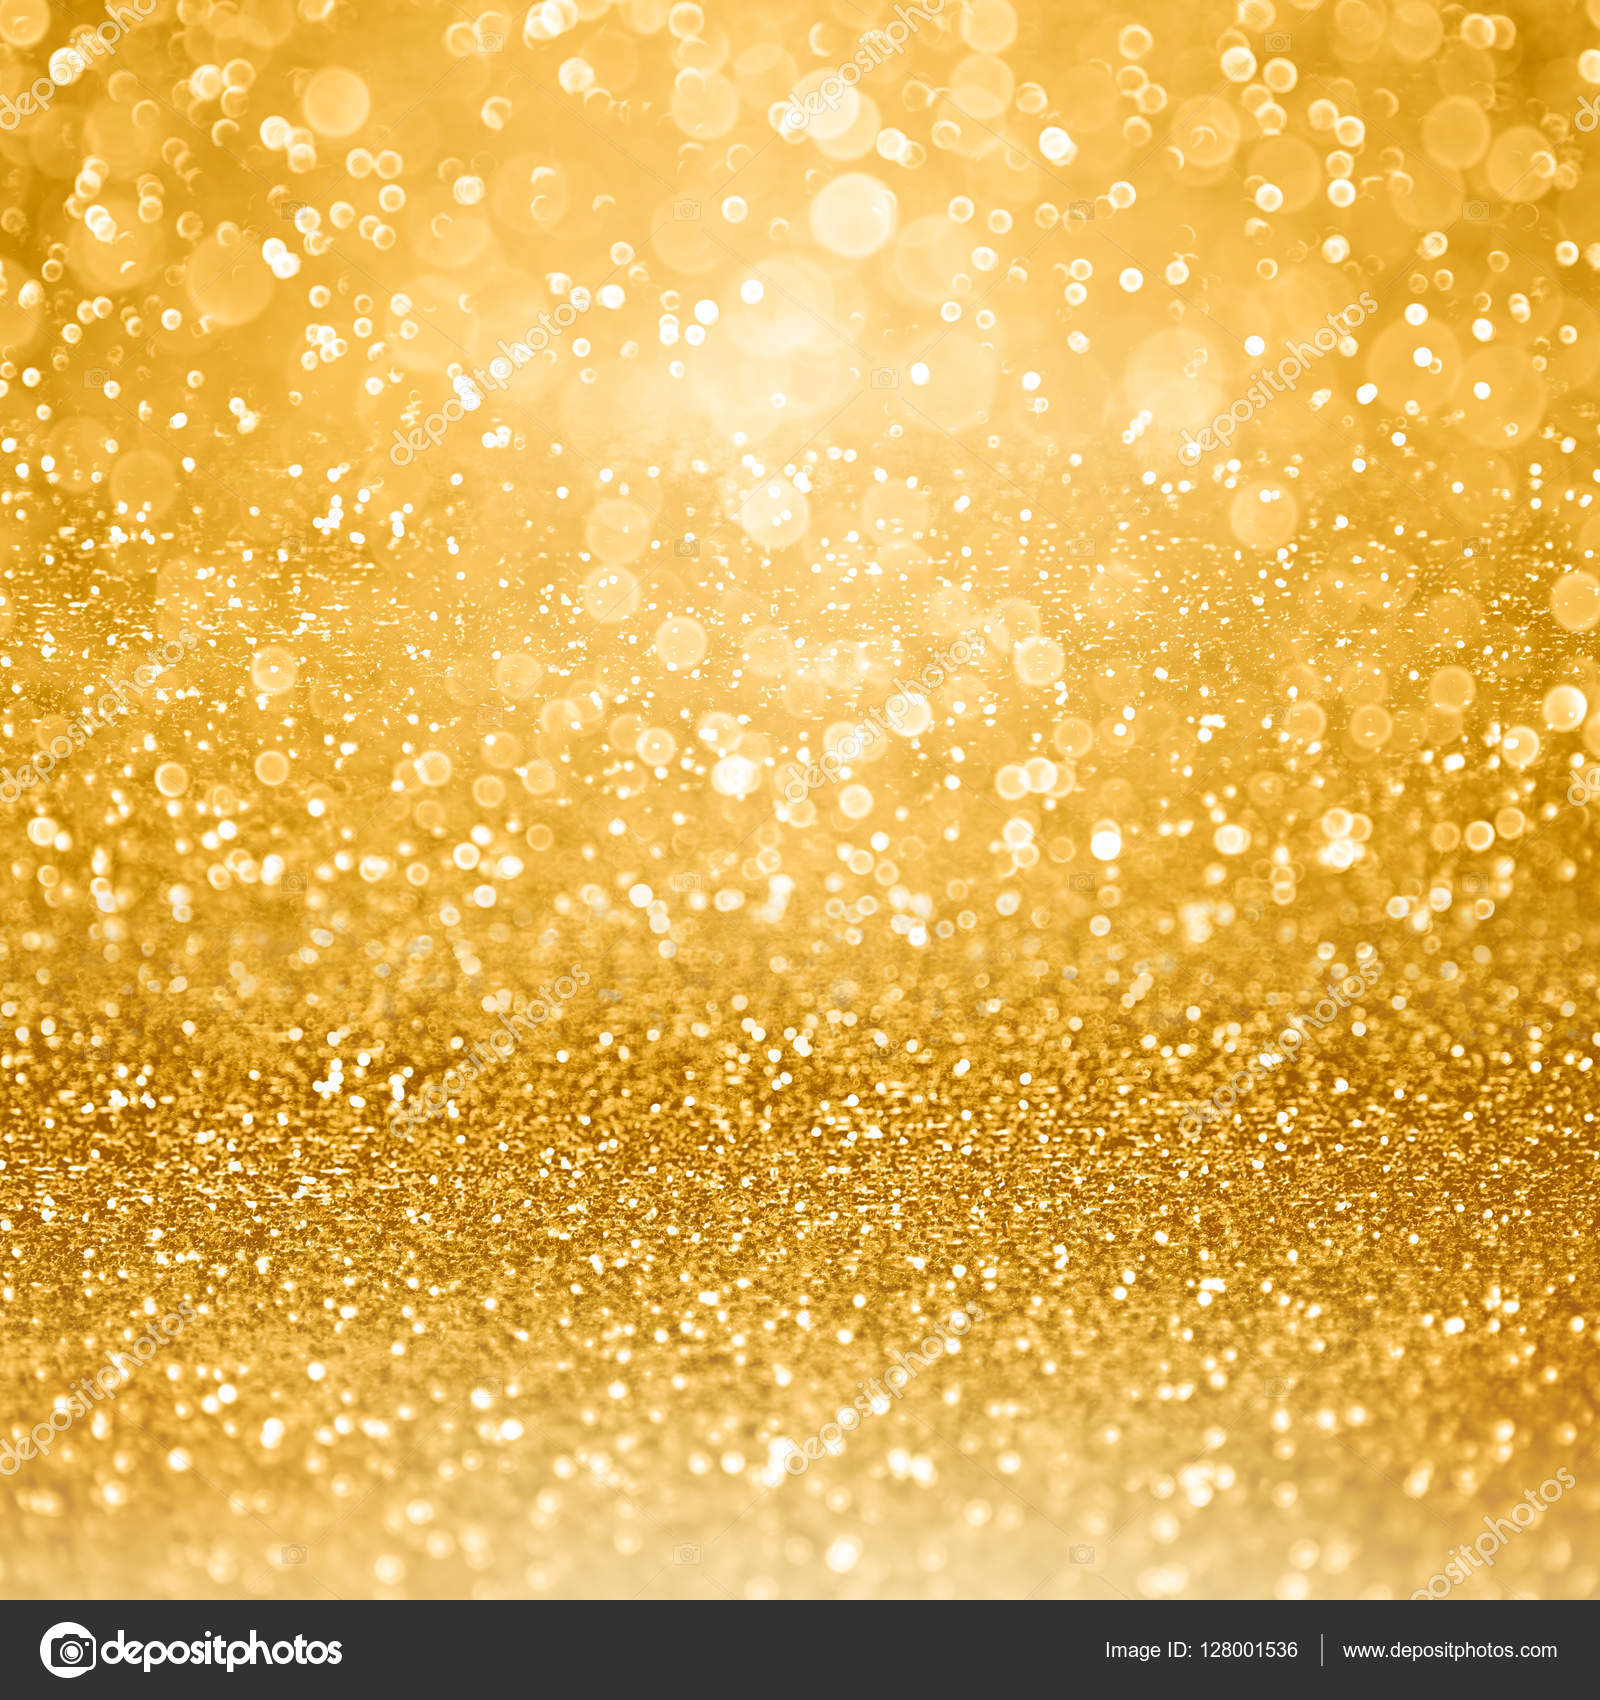 Gold Glam Golden Party Invitation Background Stock Photo by ©Steph_Zieber  128001536